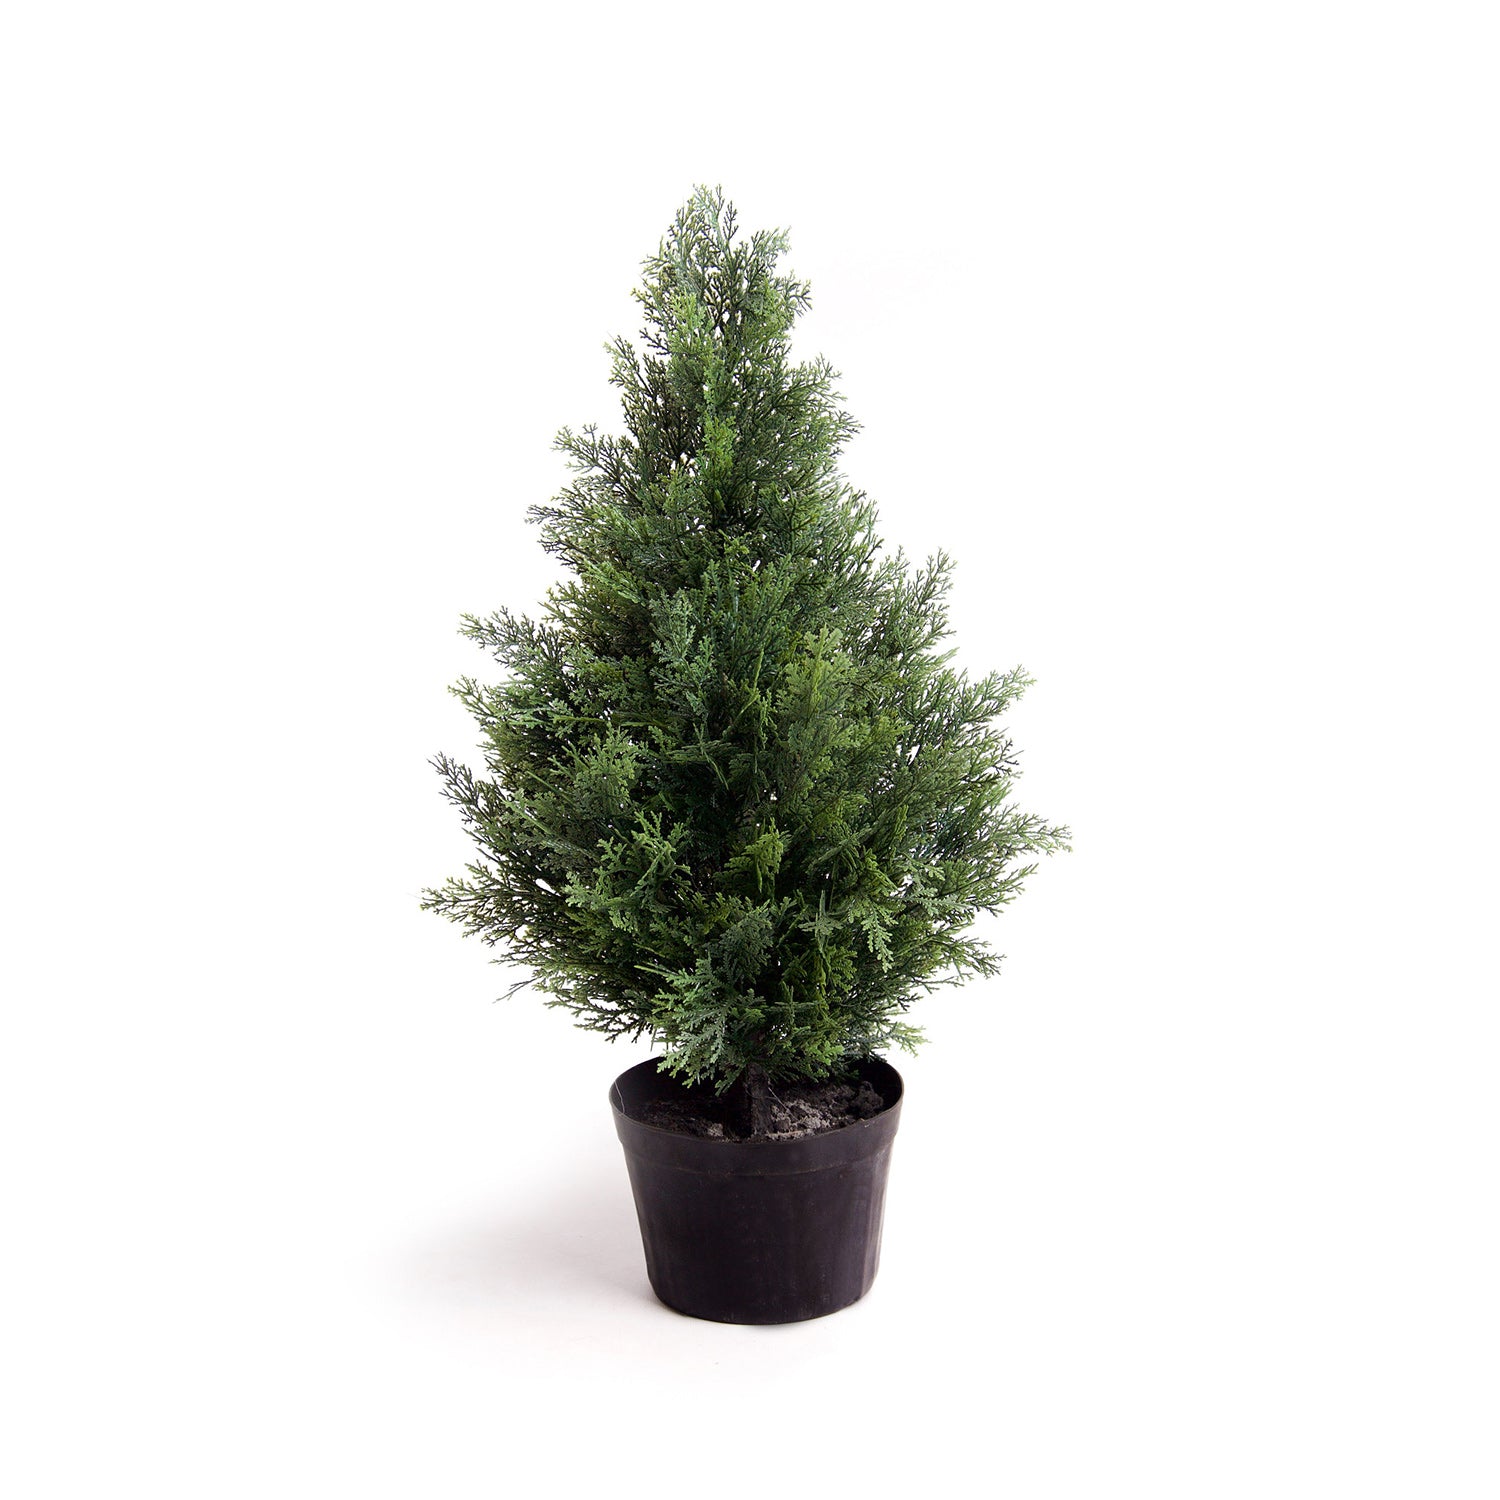 Best Artificial 2ft - 60cm Potted Cedar Topiary Tree